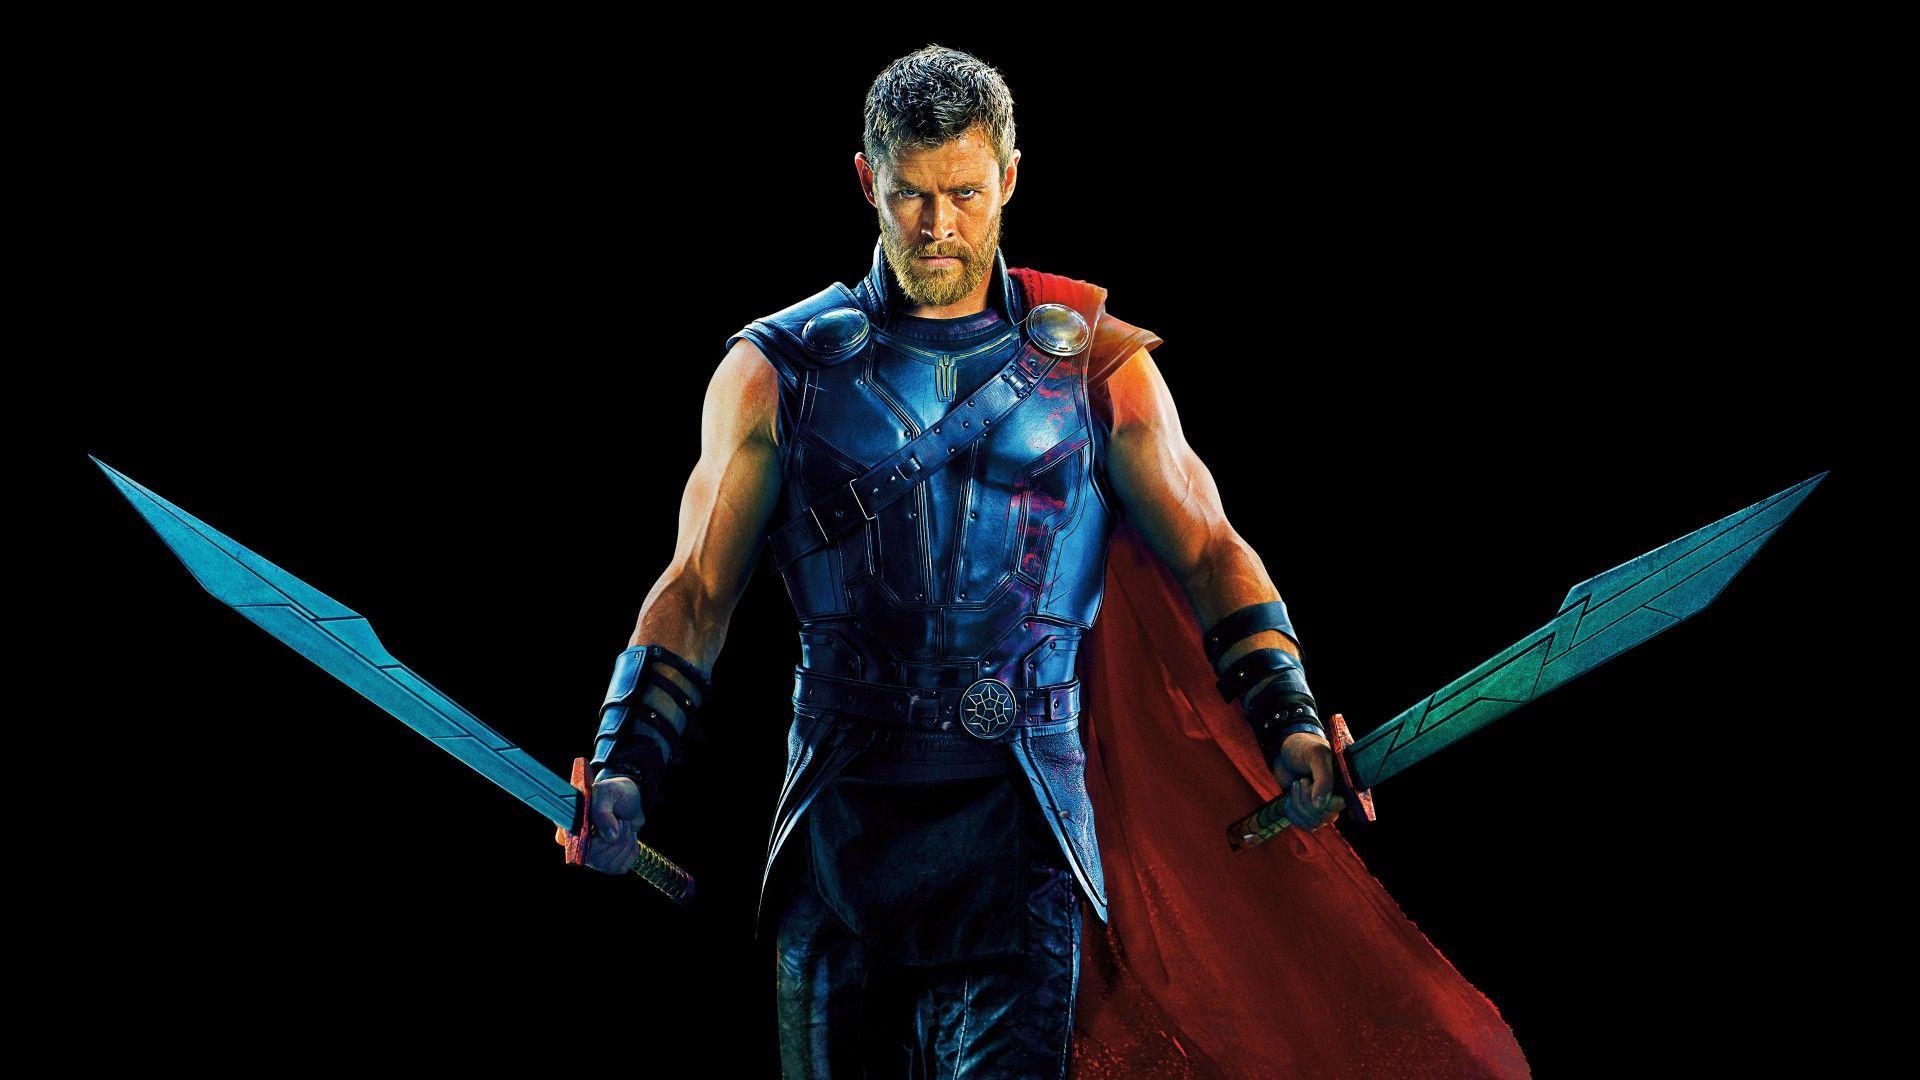 download the new for android Thor: Ragnarok